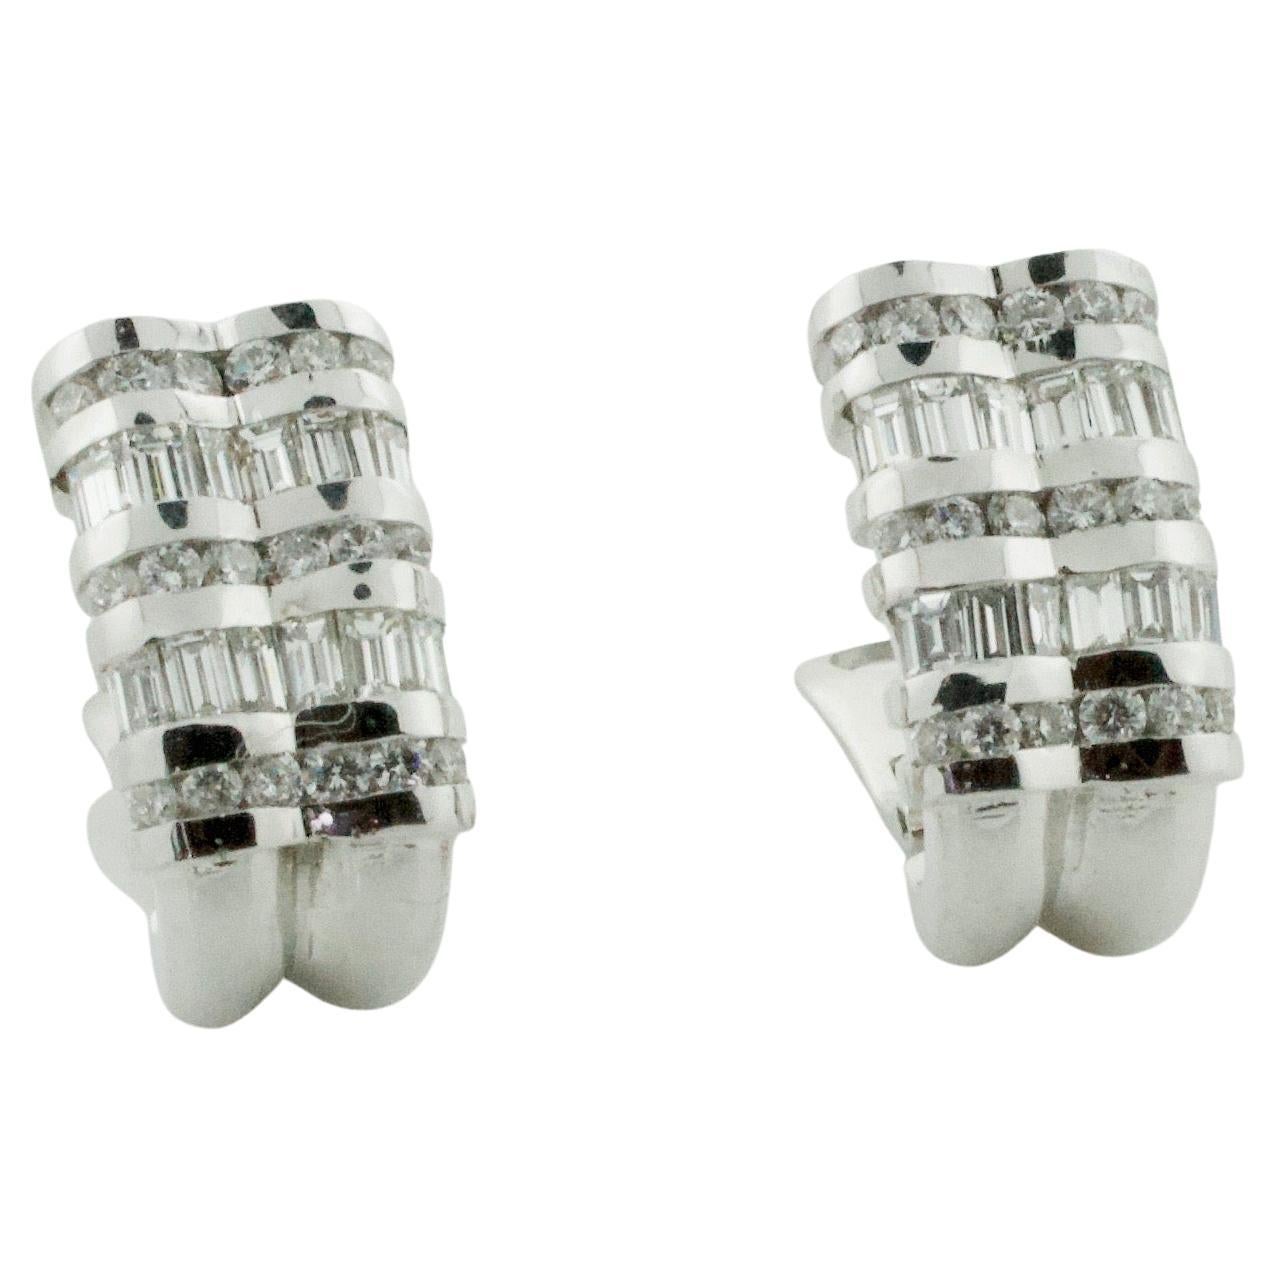 Chanel Set Diamond  Earrings in 18k White Gold 3.45 Carats Total Weight For Sale